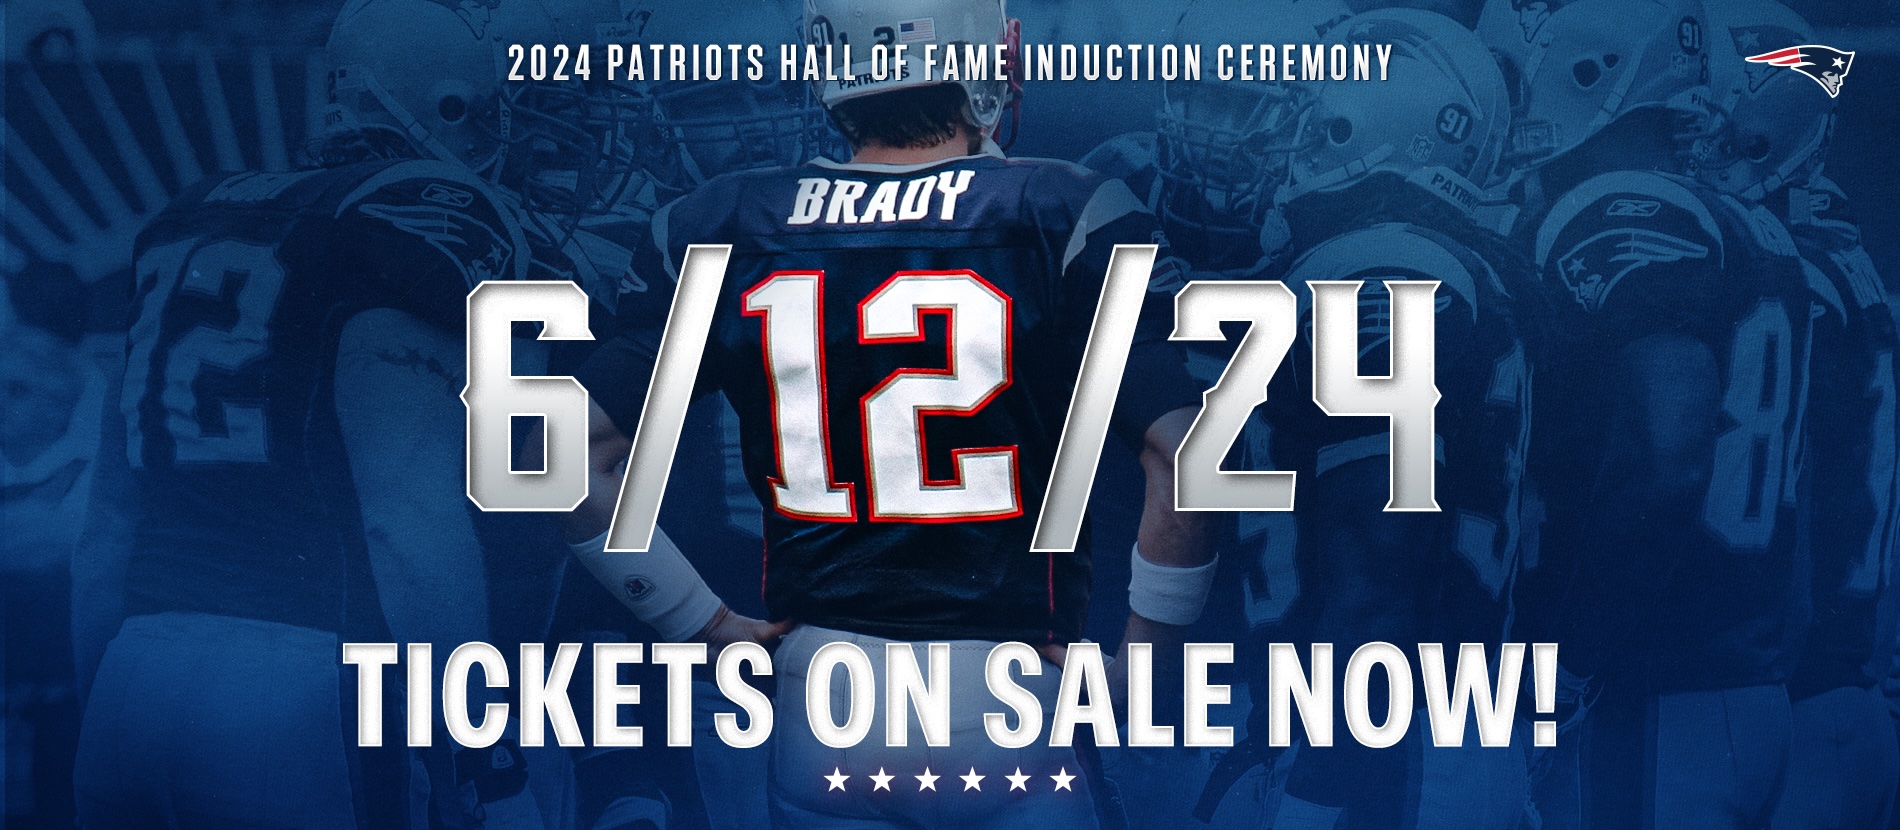 Click to buy tickets for the Tom Brady Hall of Fame Induction Ceremony!